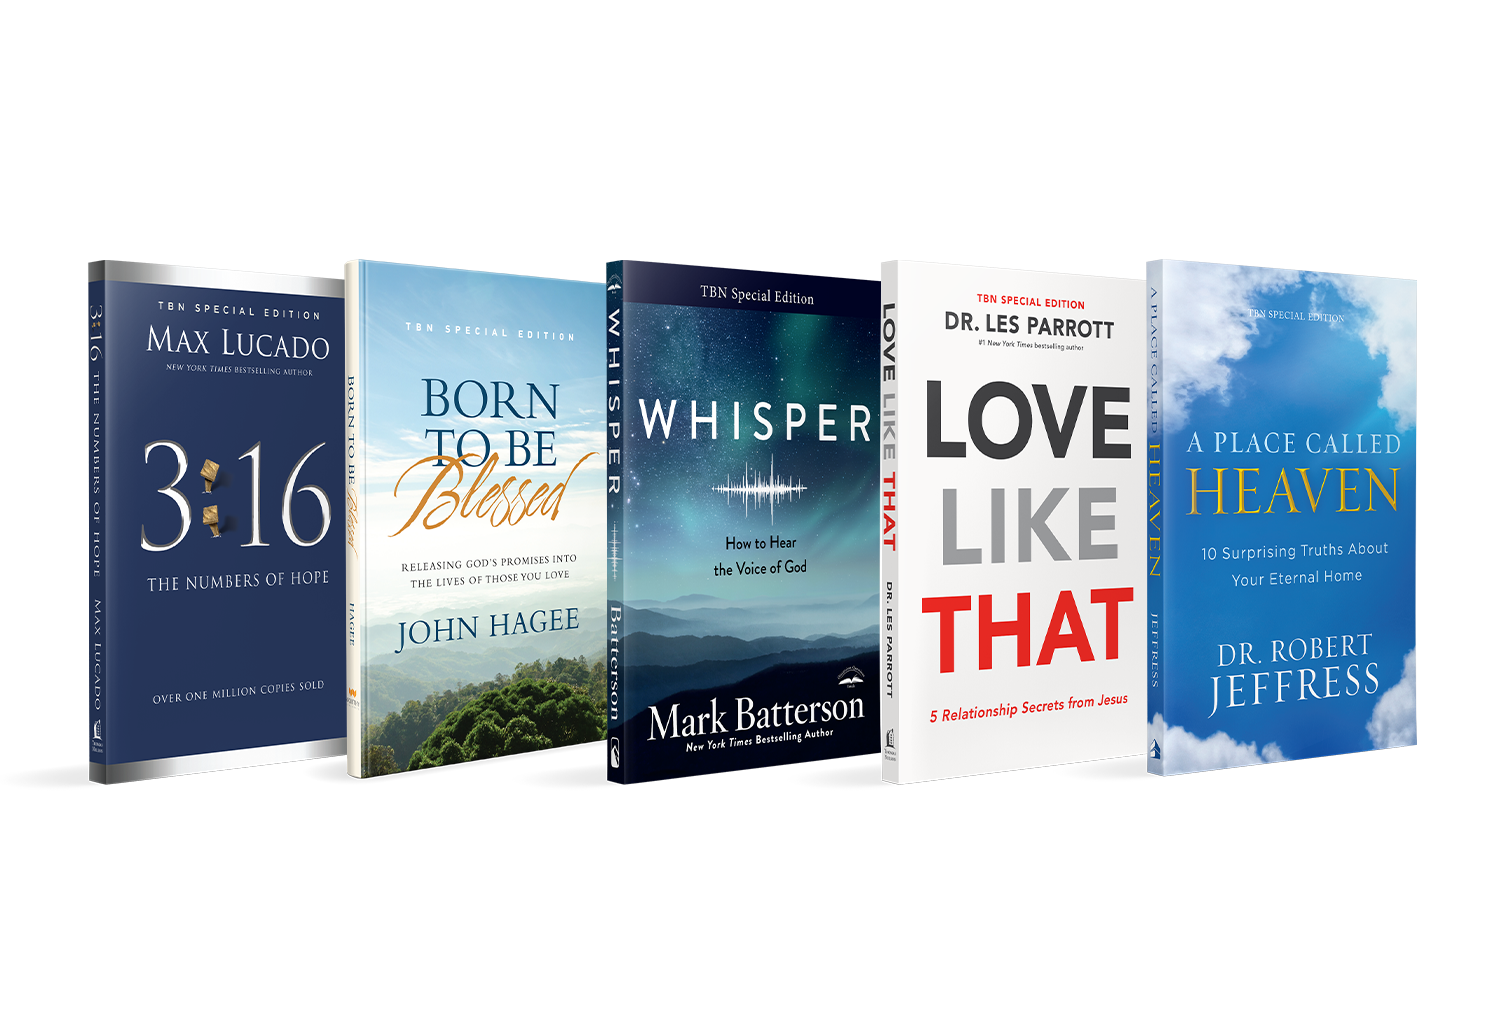 Our Heavenly Father Bundle of books on TBN